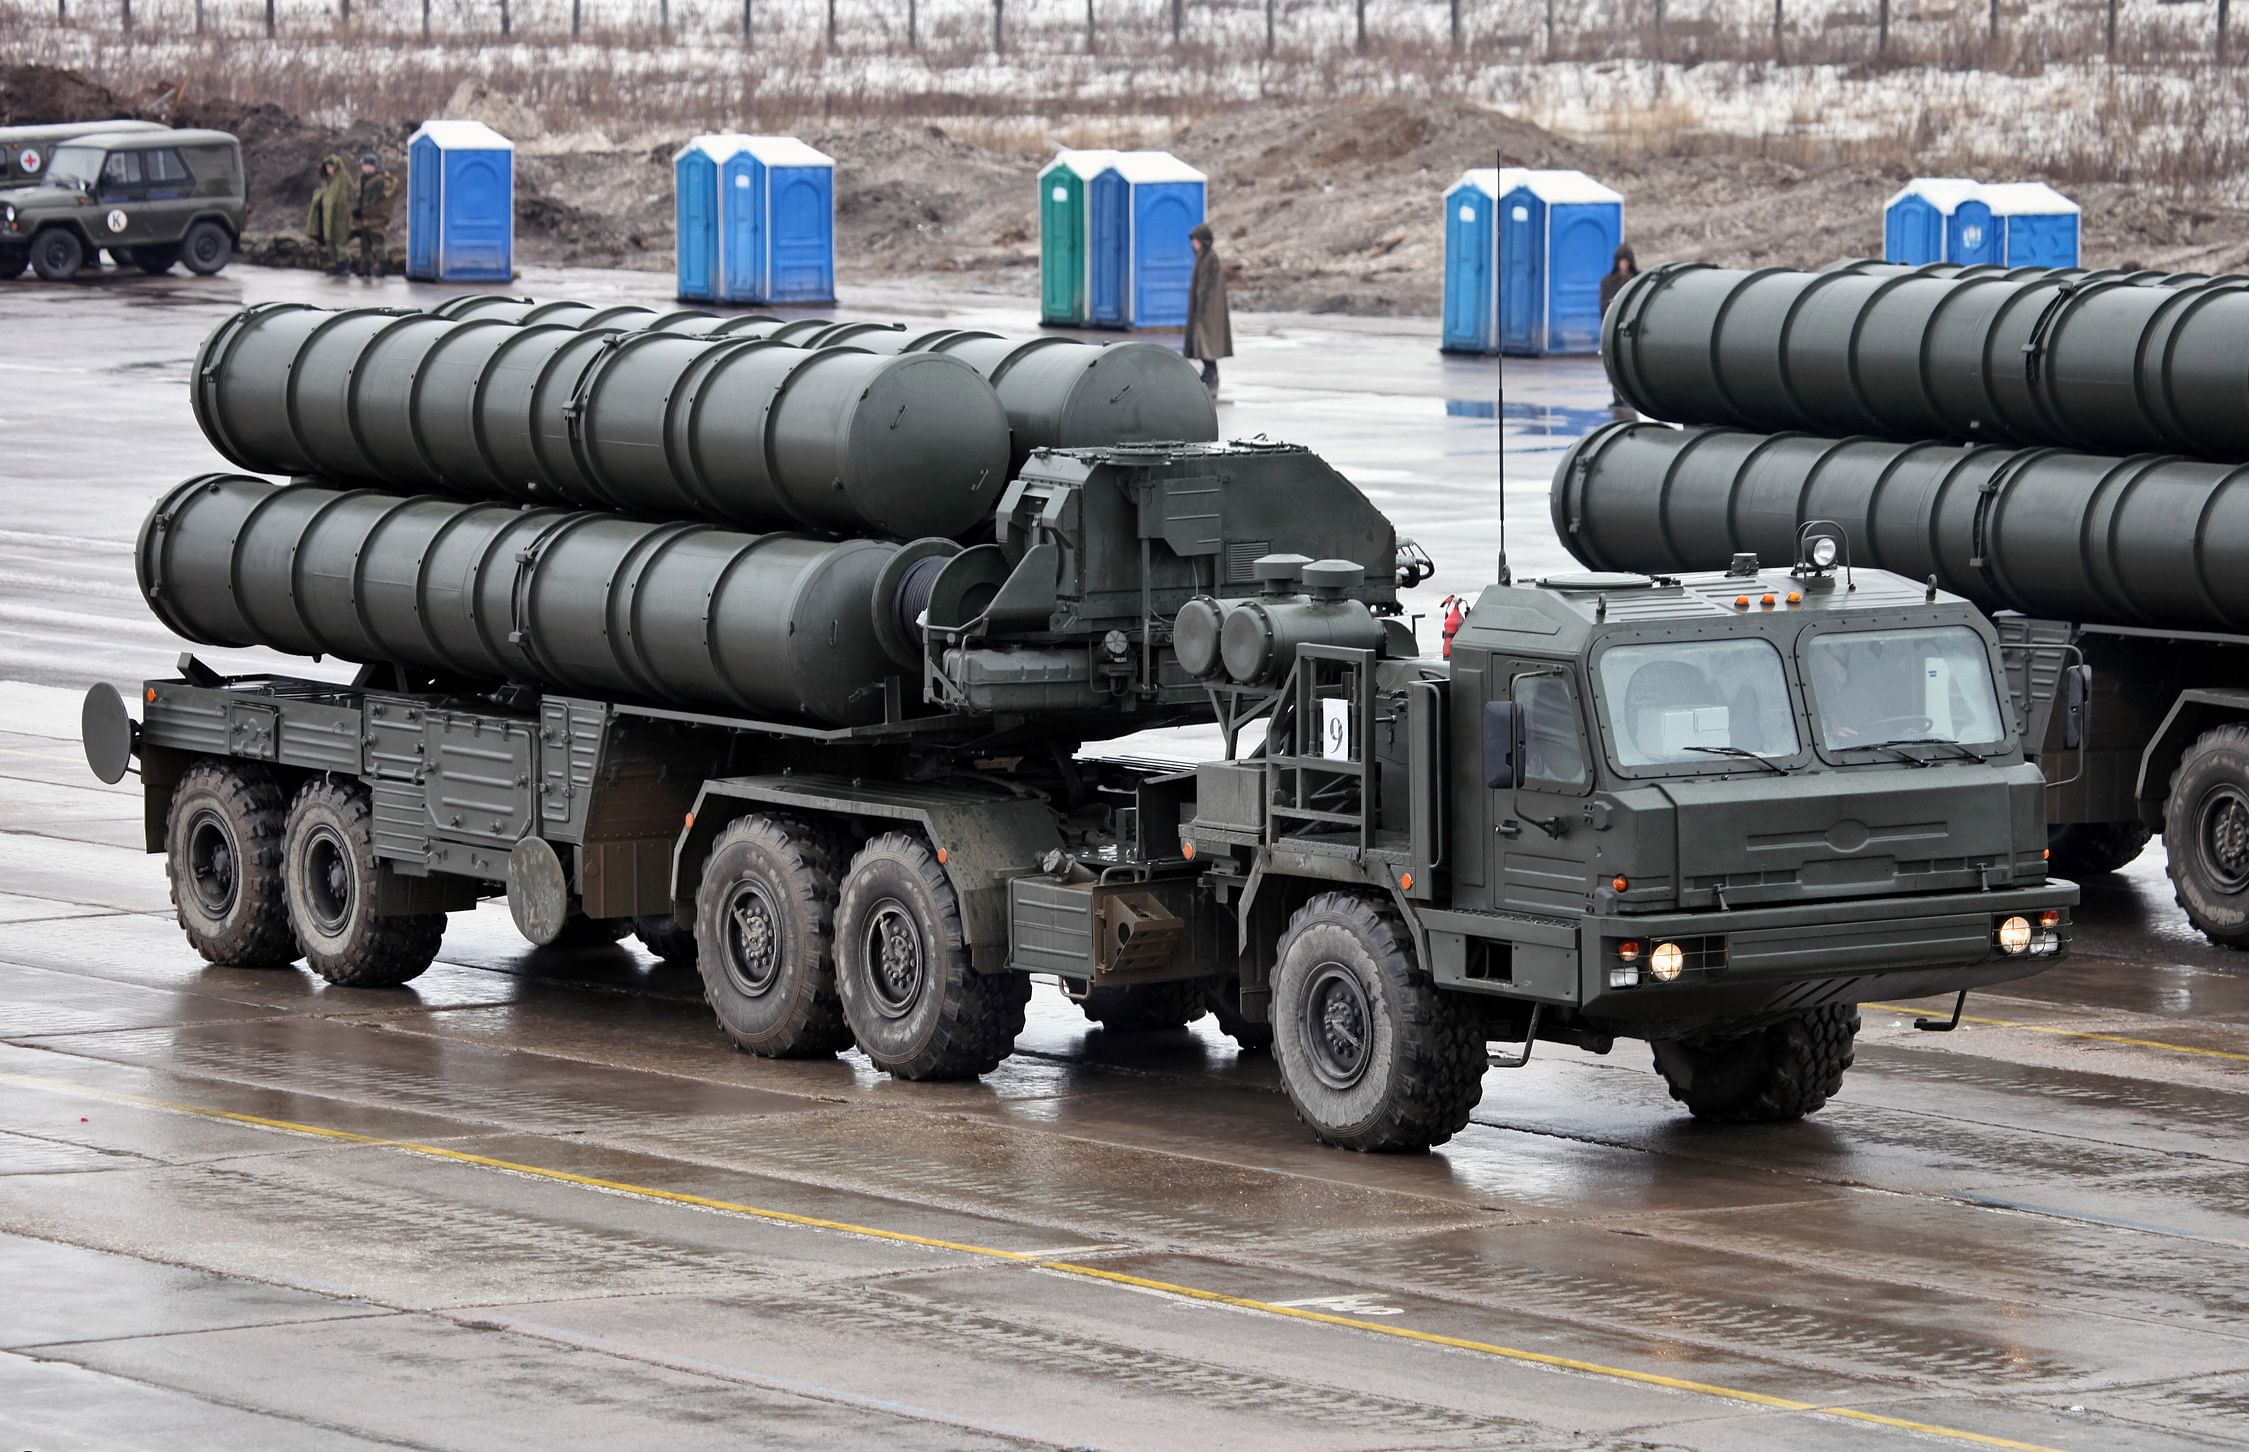 he Rs 39,000 crore deal to buy five S-400 Triumf air defence systems is high on the agenda of Modi-Putin summit.